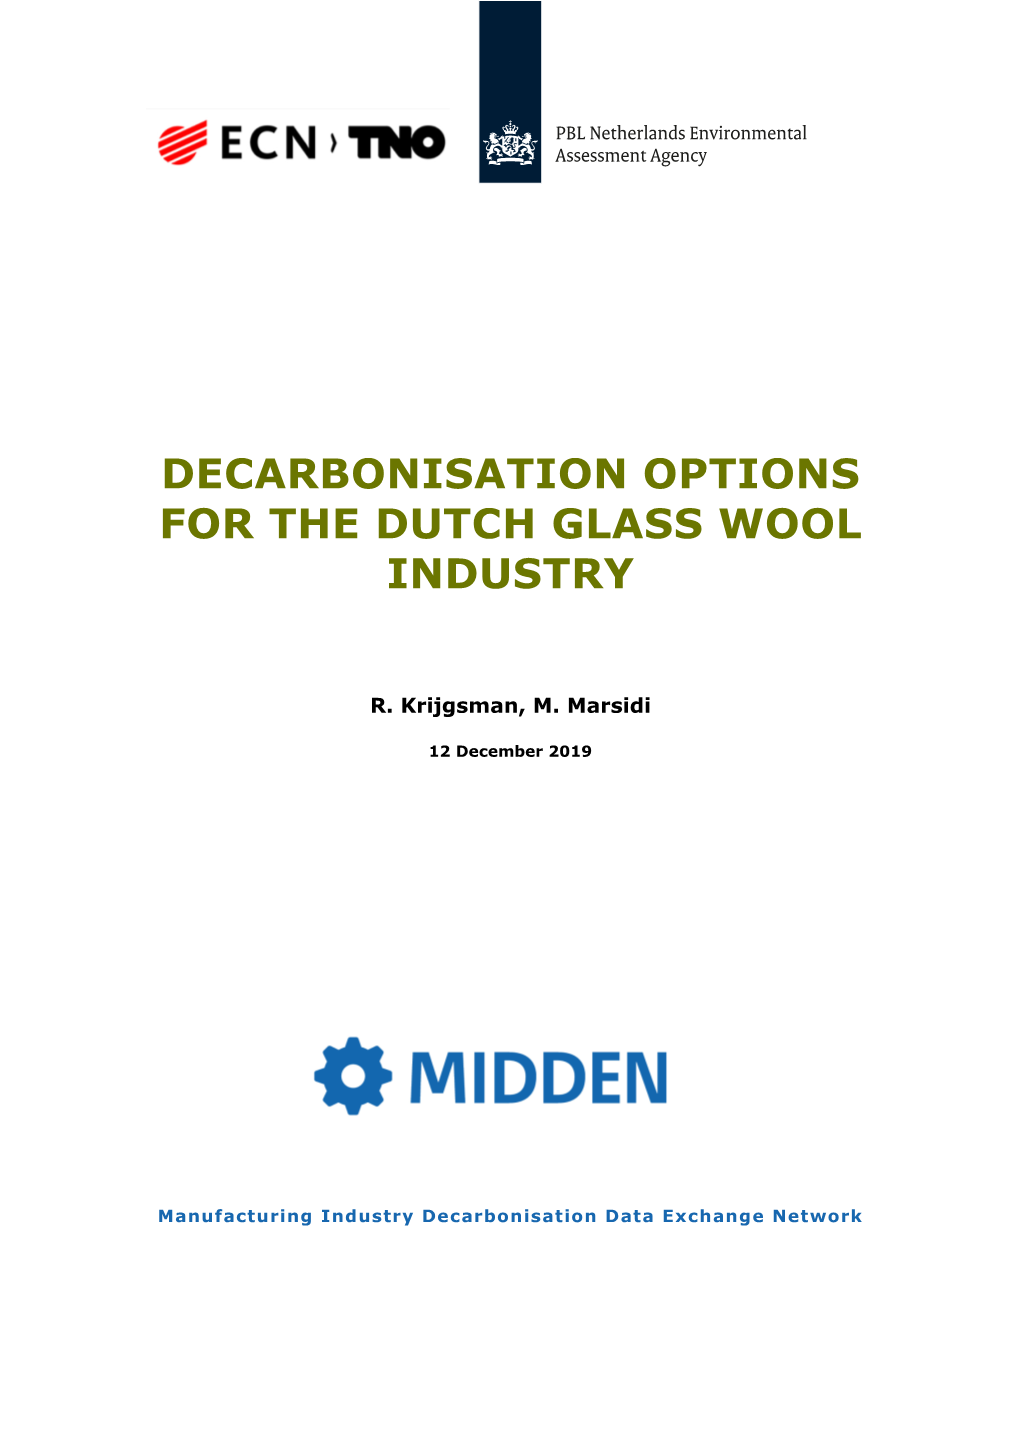 Decarbonisation Options for the Dutch Glass Wool Industry